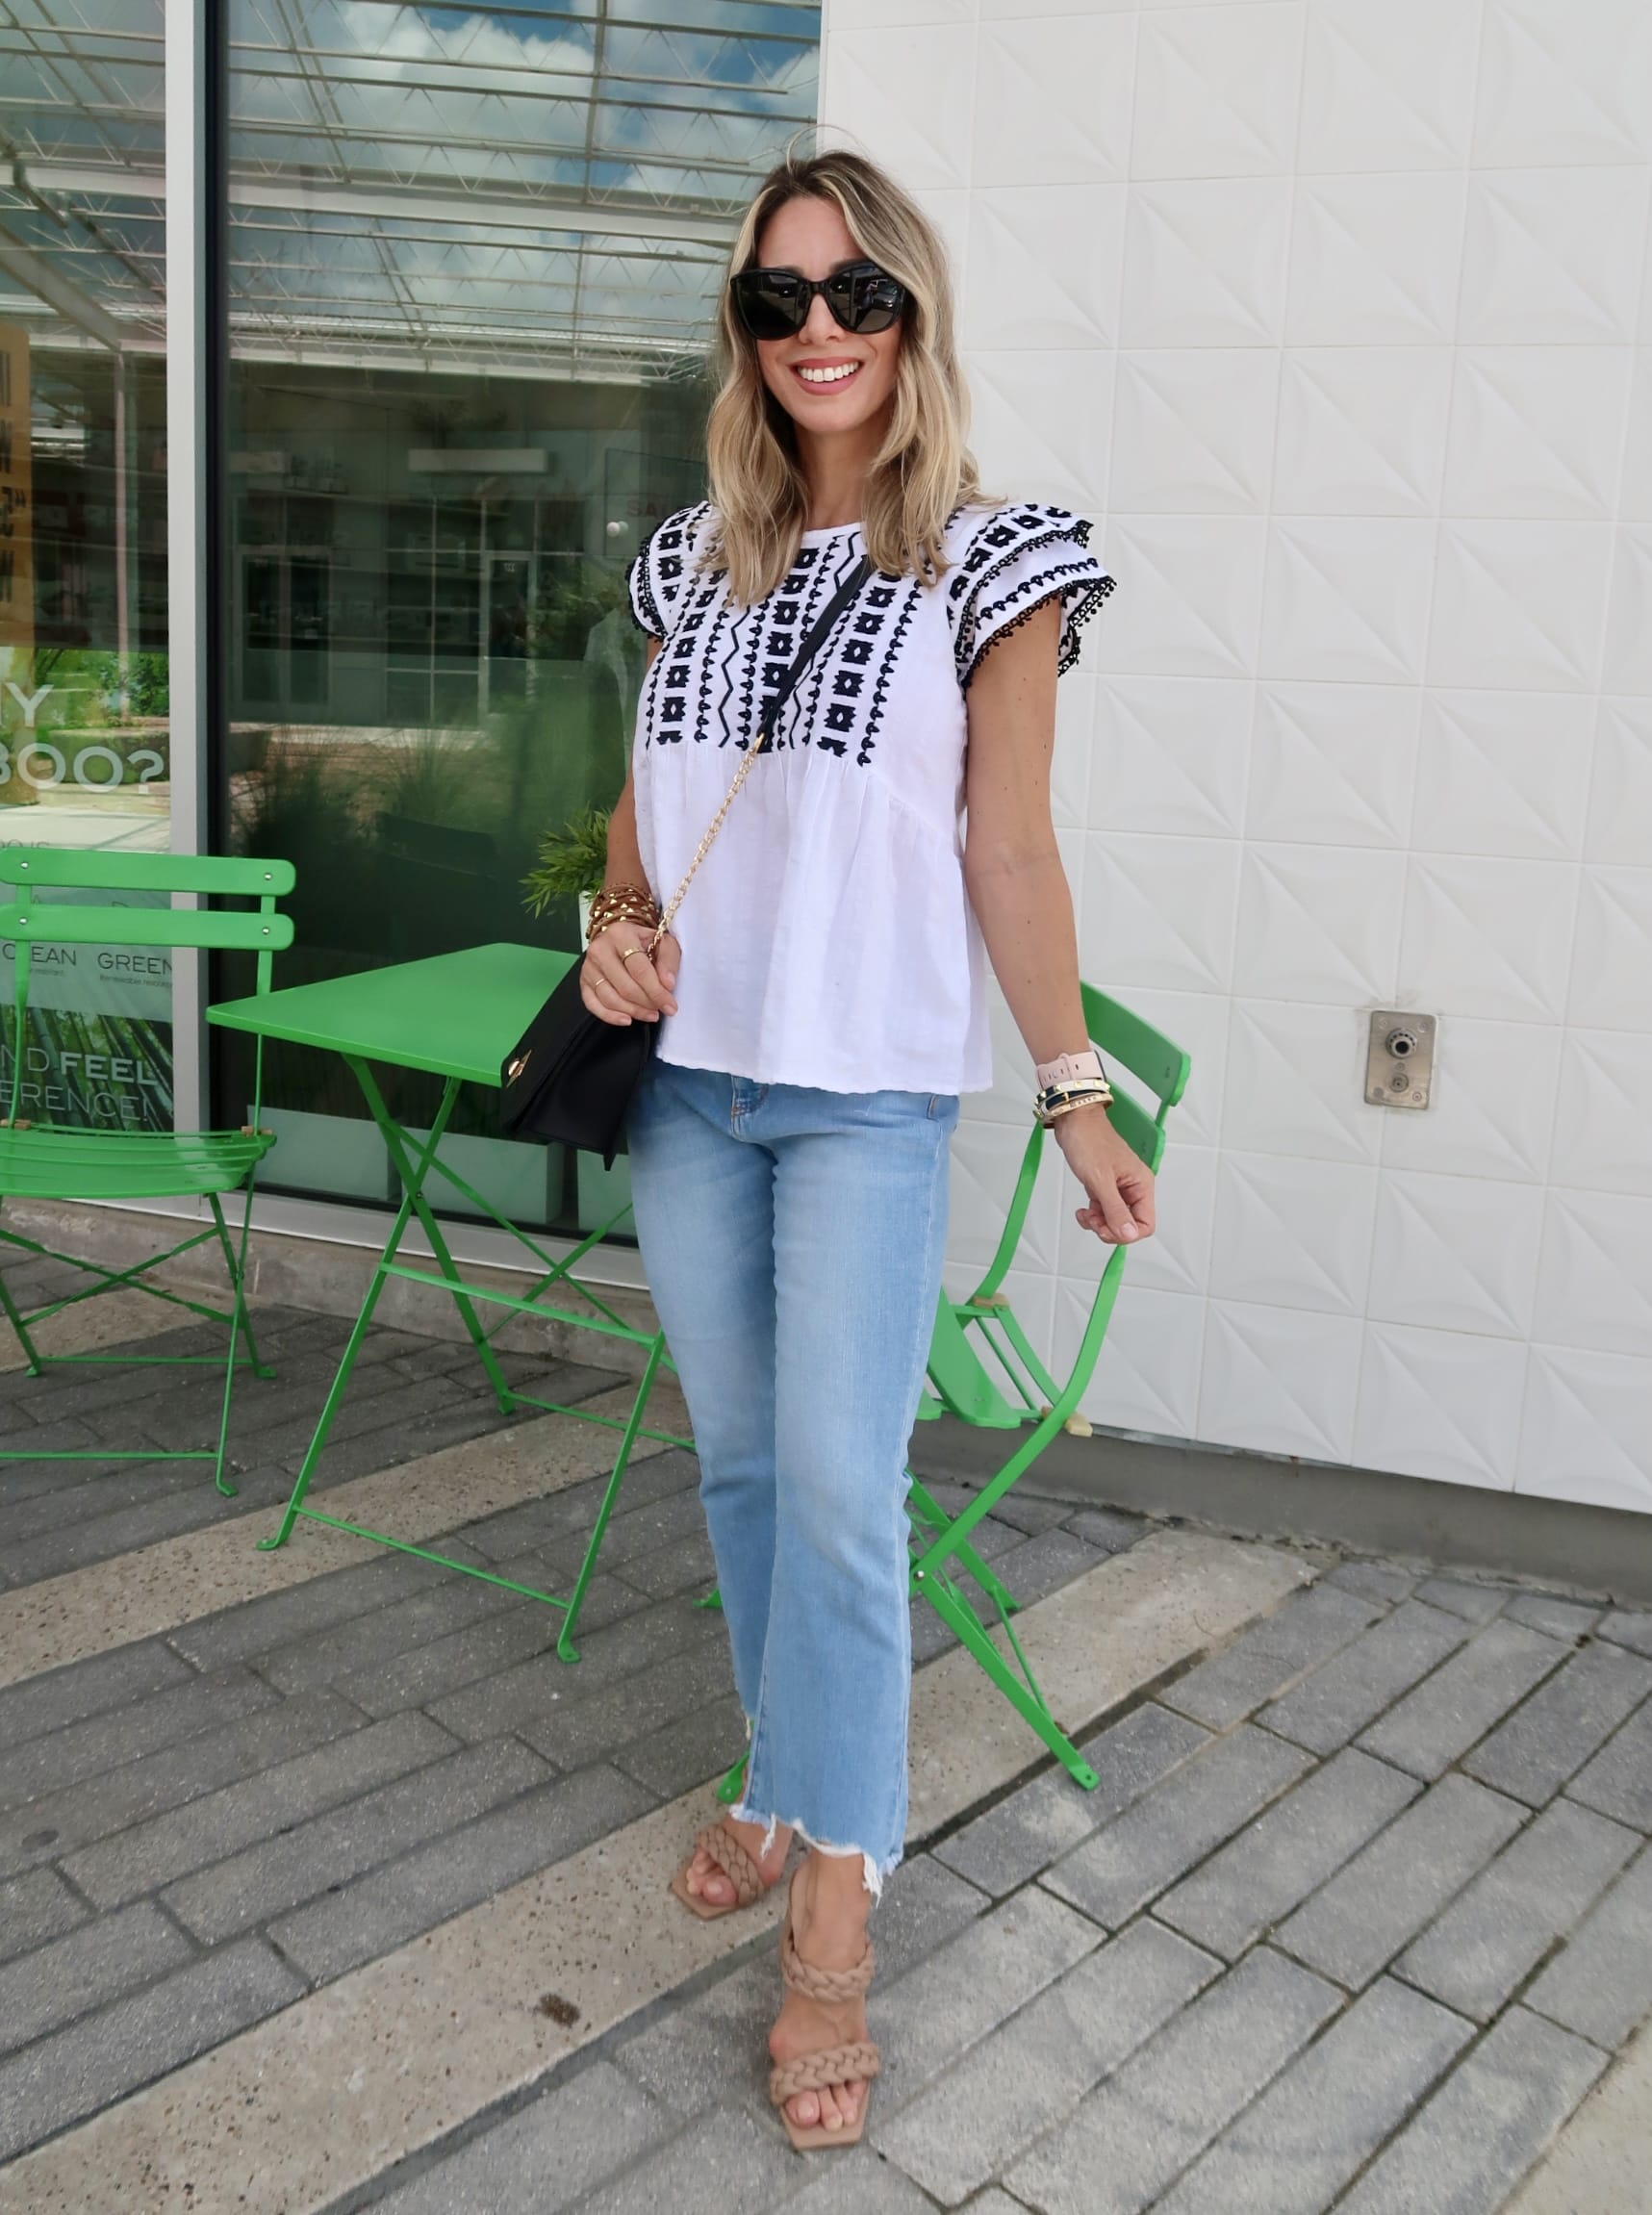 Outfits Lately, Embroidered Top, Jeans, Sandals, Crossbody 